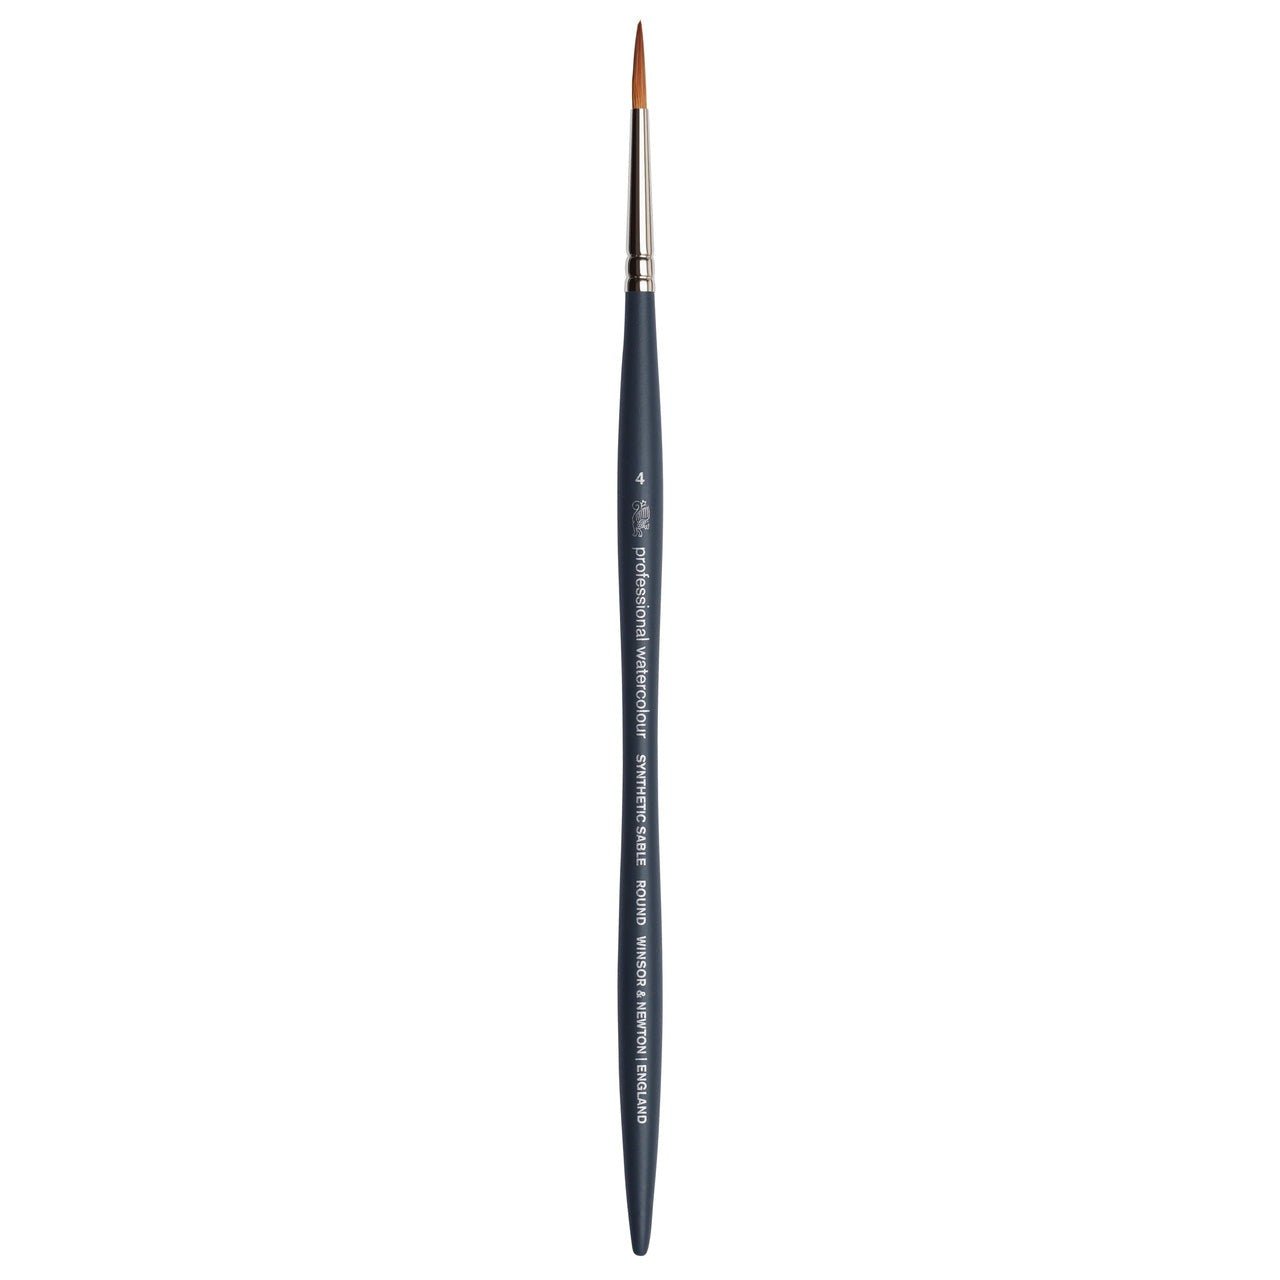 Winsor & Newton Professional Watercolor Synthetic Sable Brush - Round 4 - merriartist.com